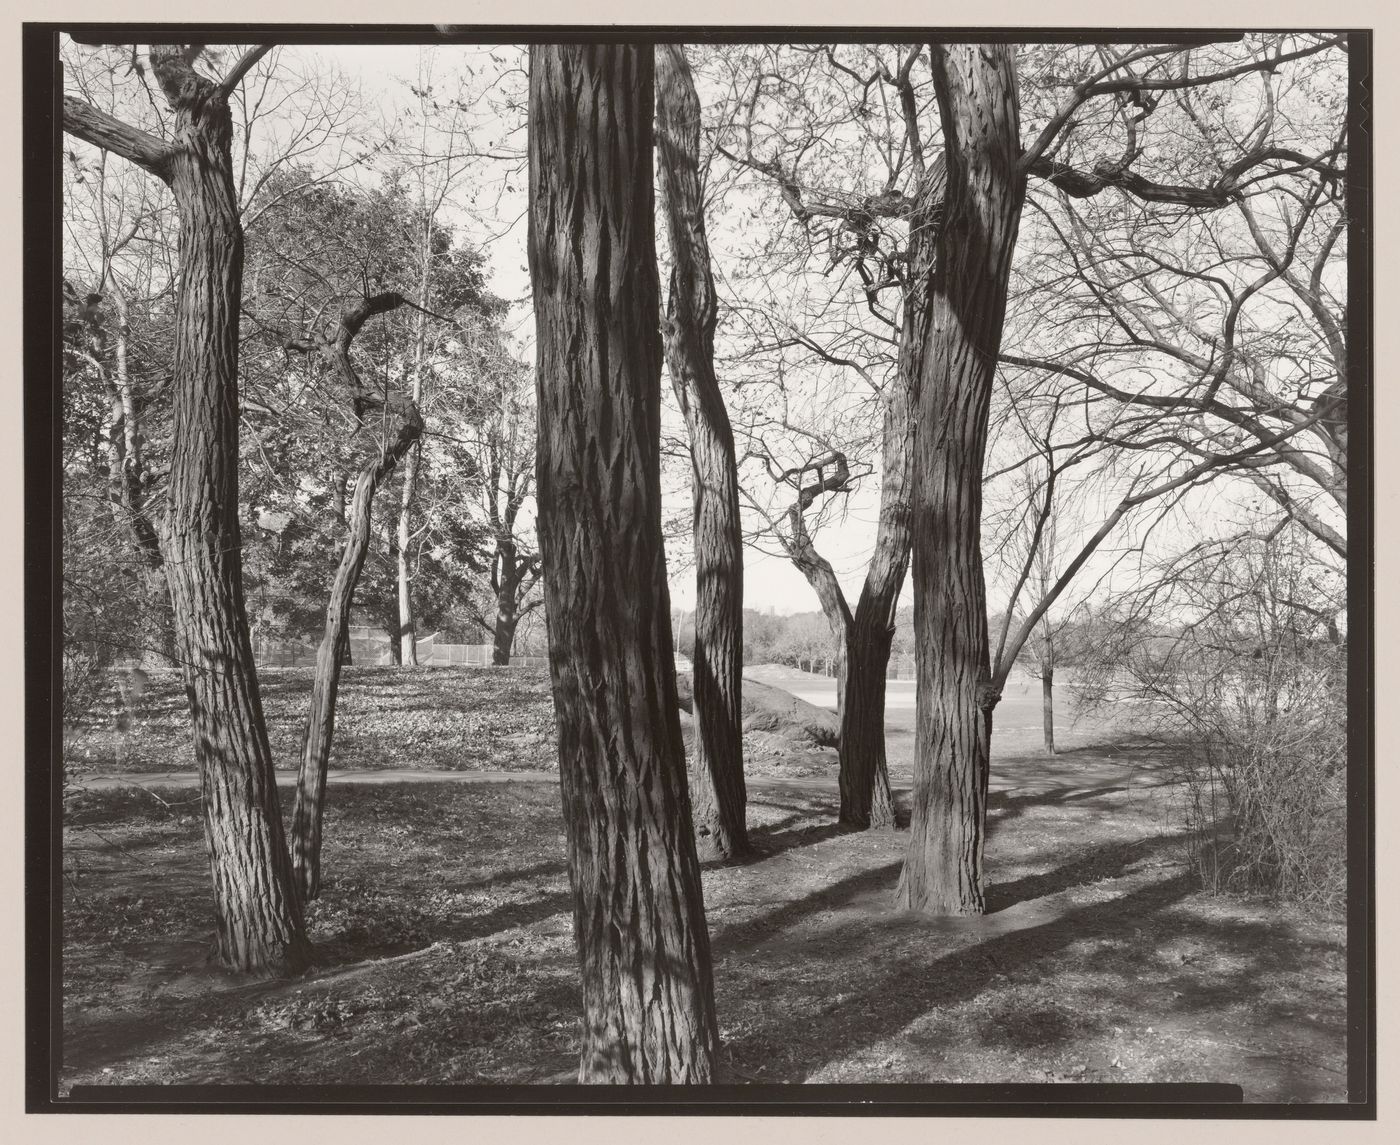 View of trees adjacent to the East Meadow, Central Park, New York City, New York